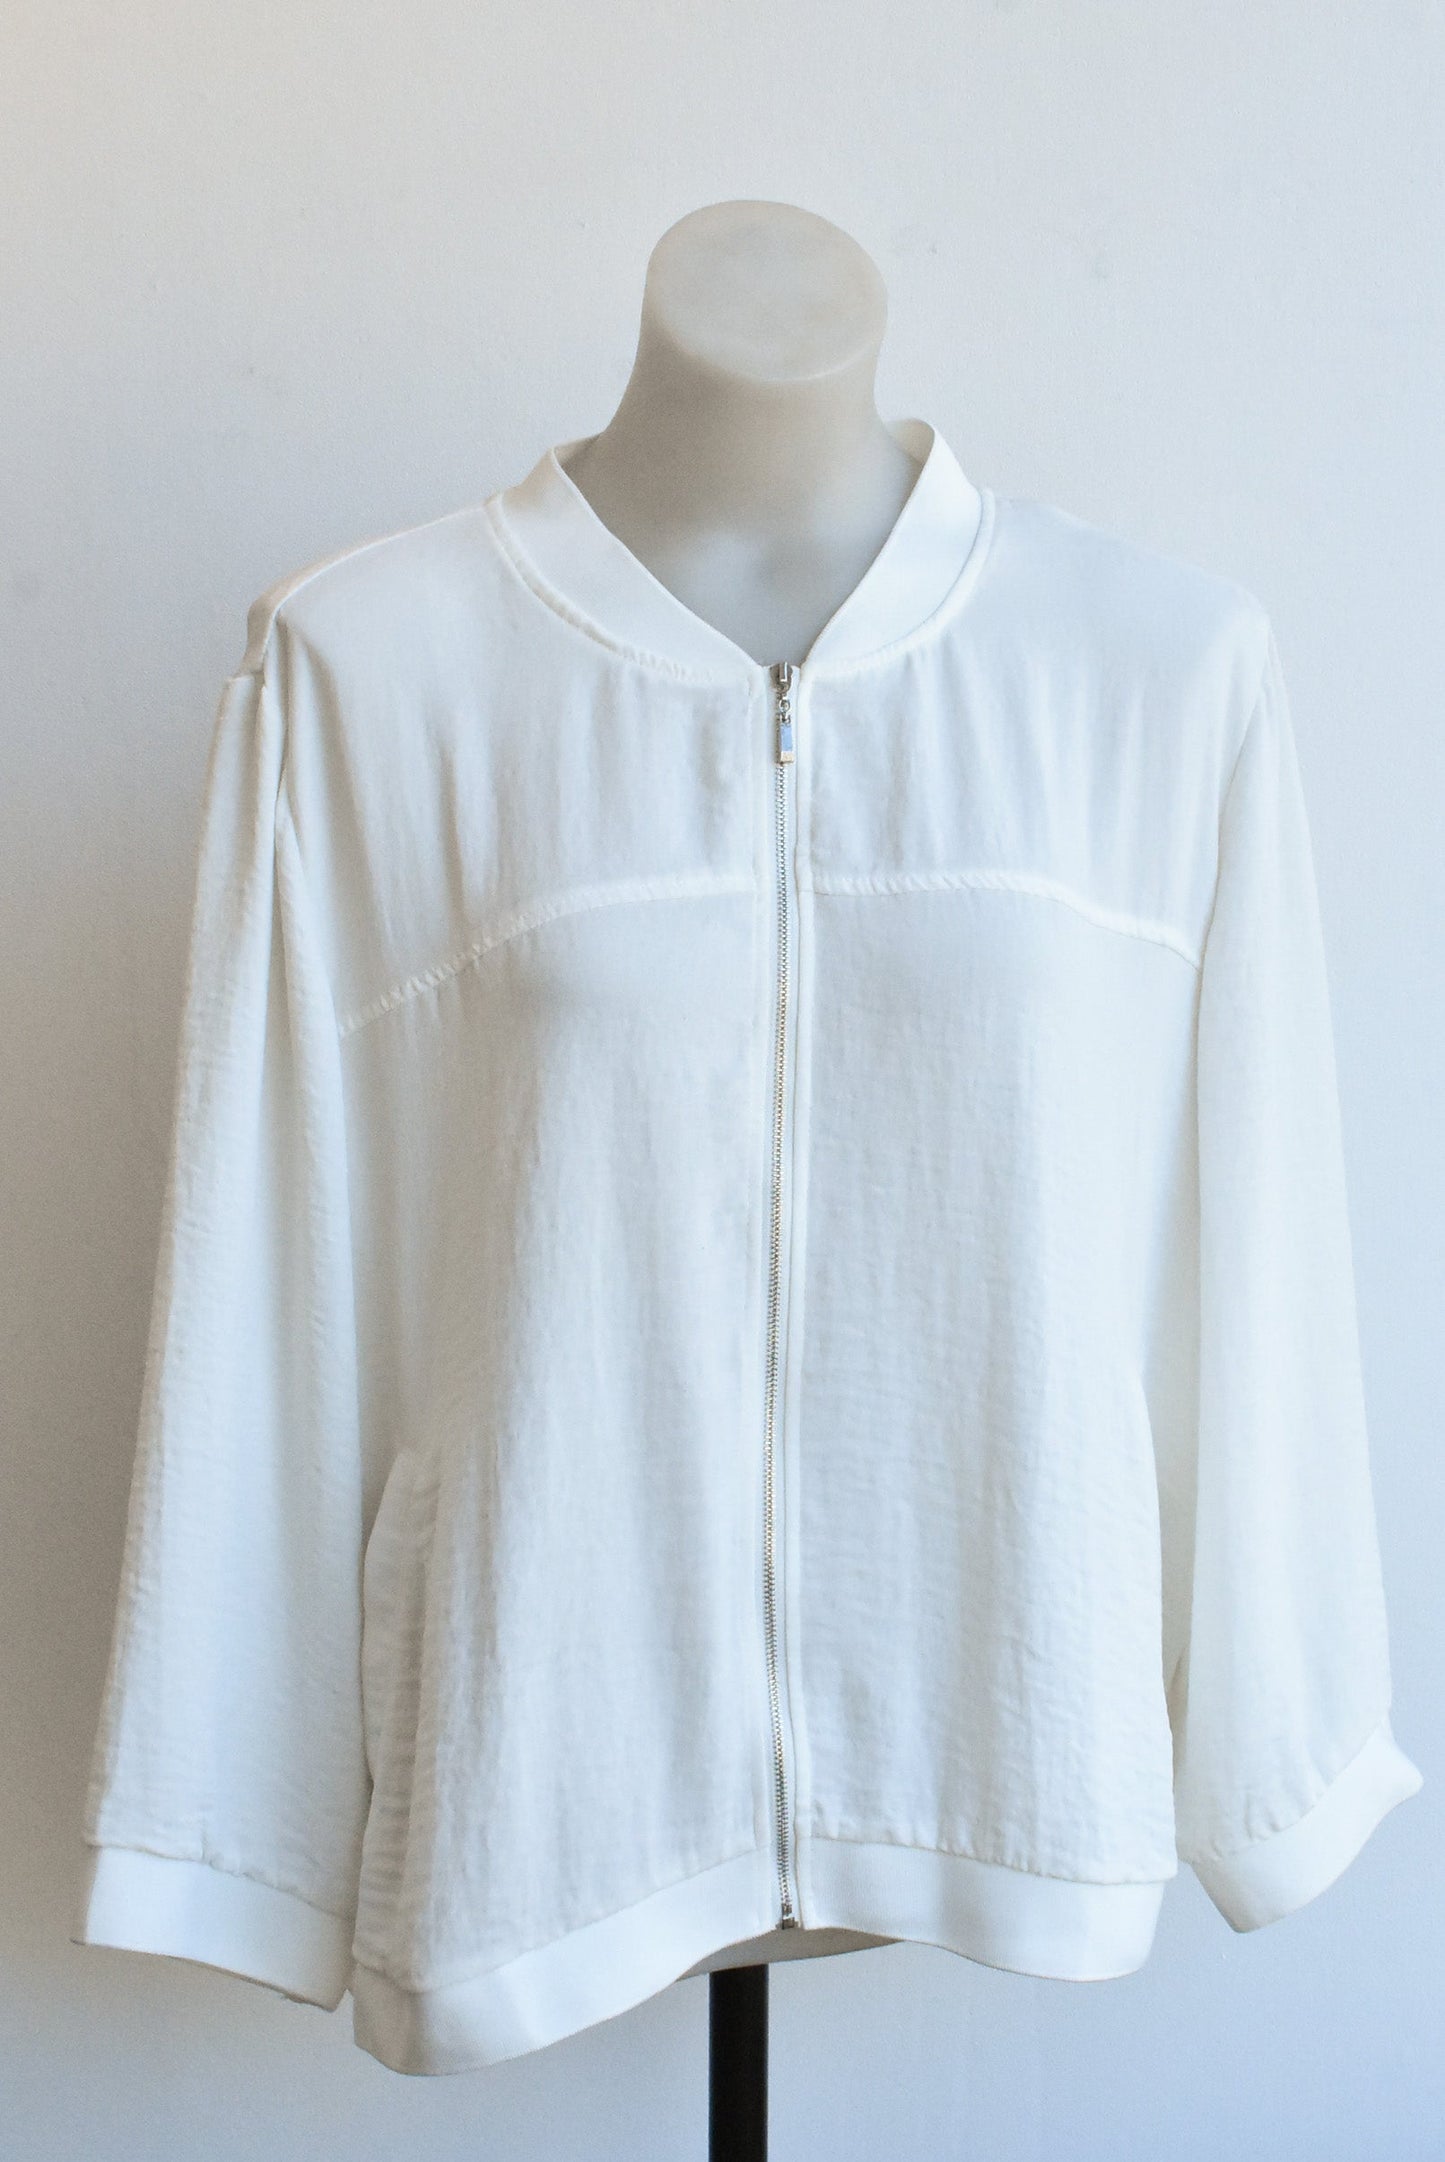 Merric white bomber-style top, size 18